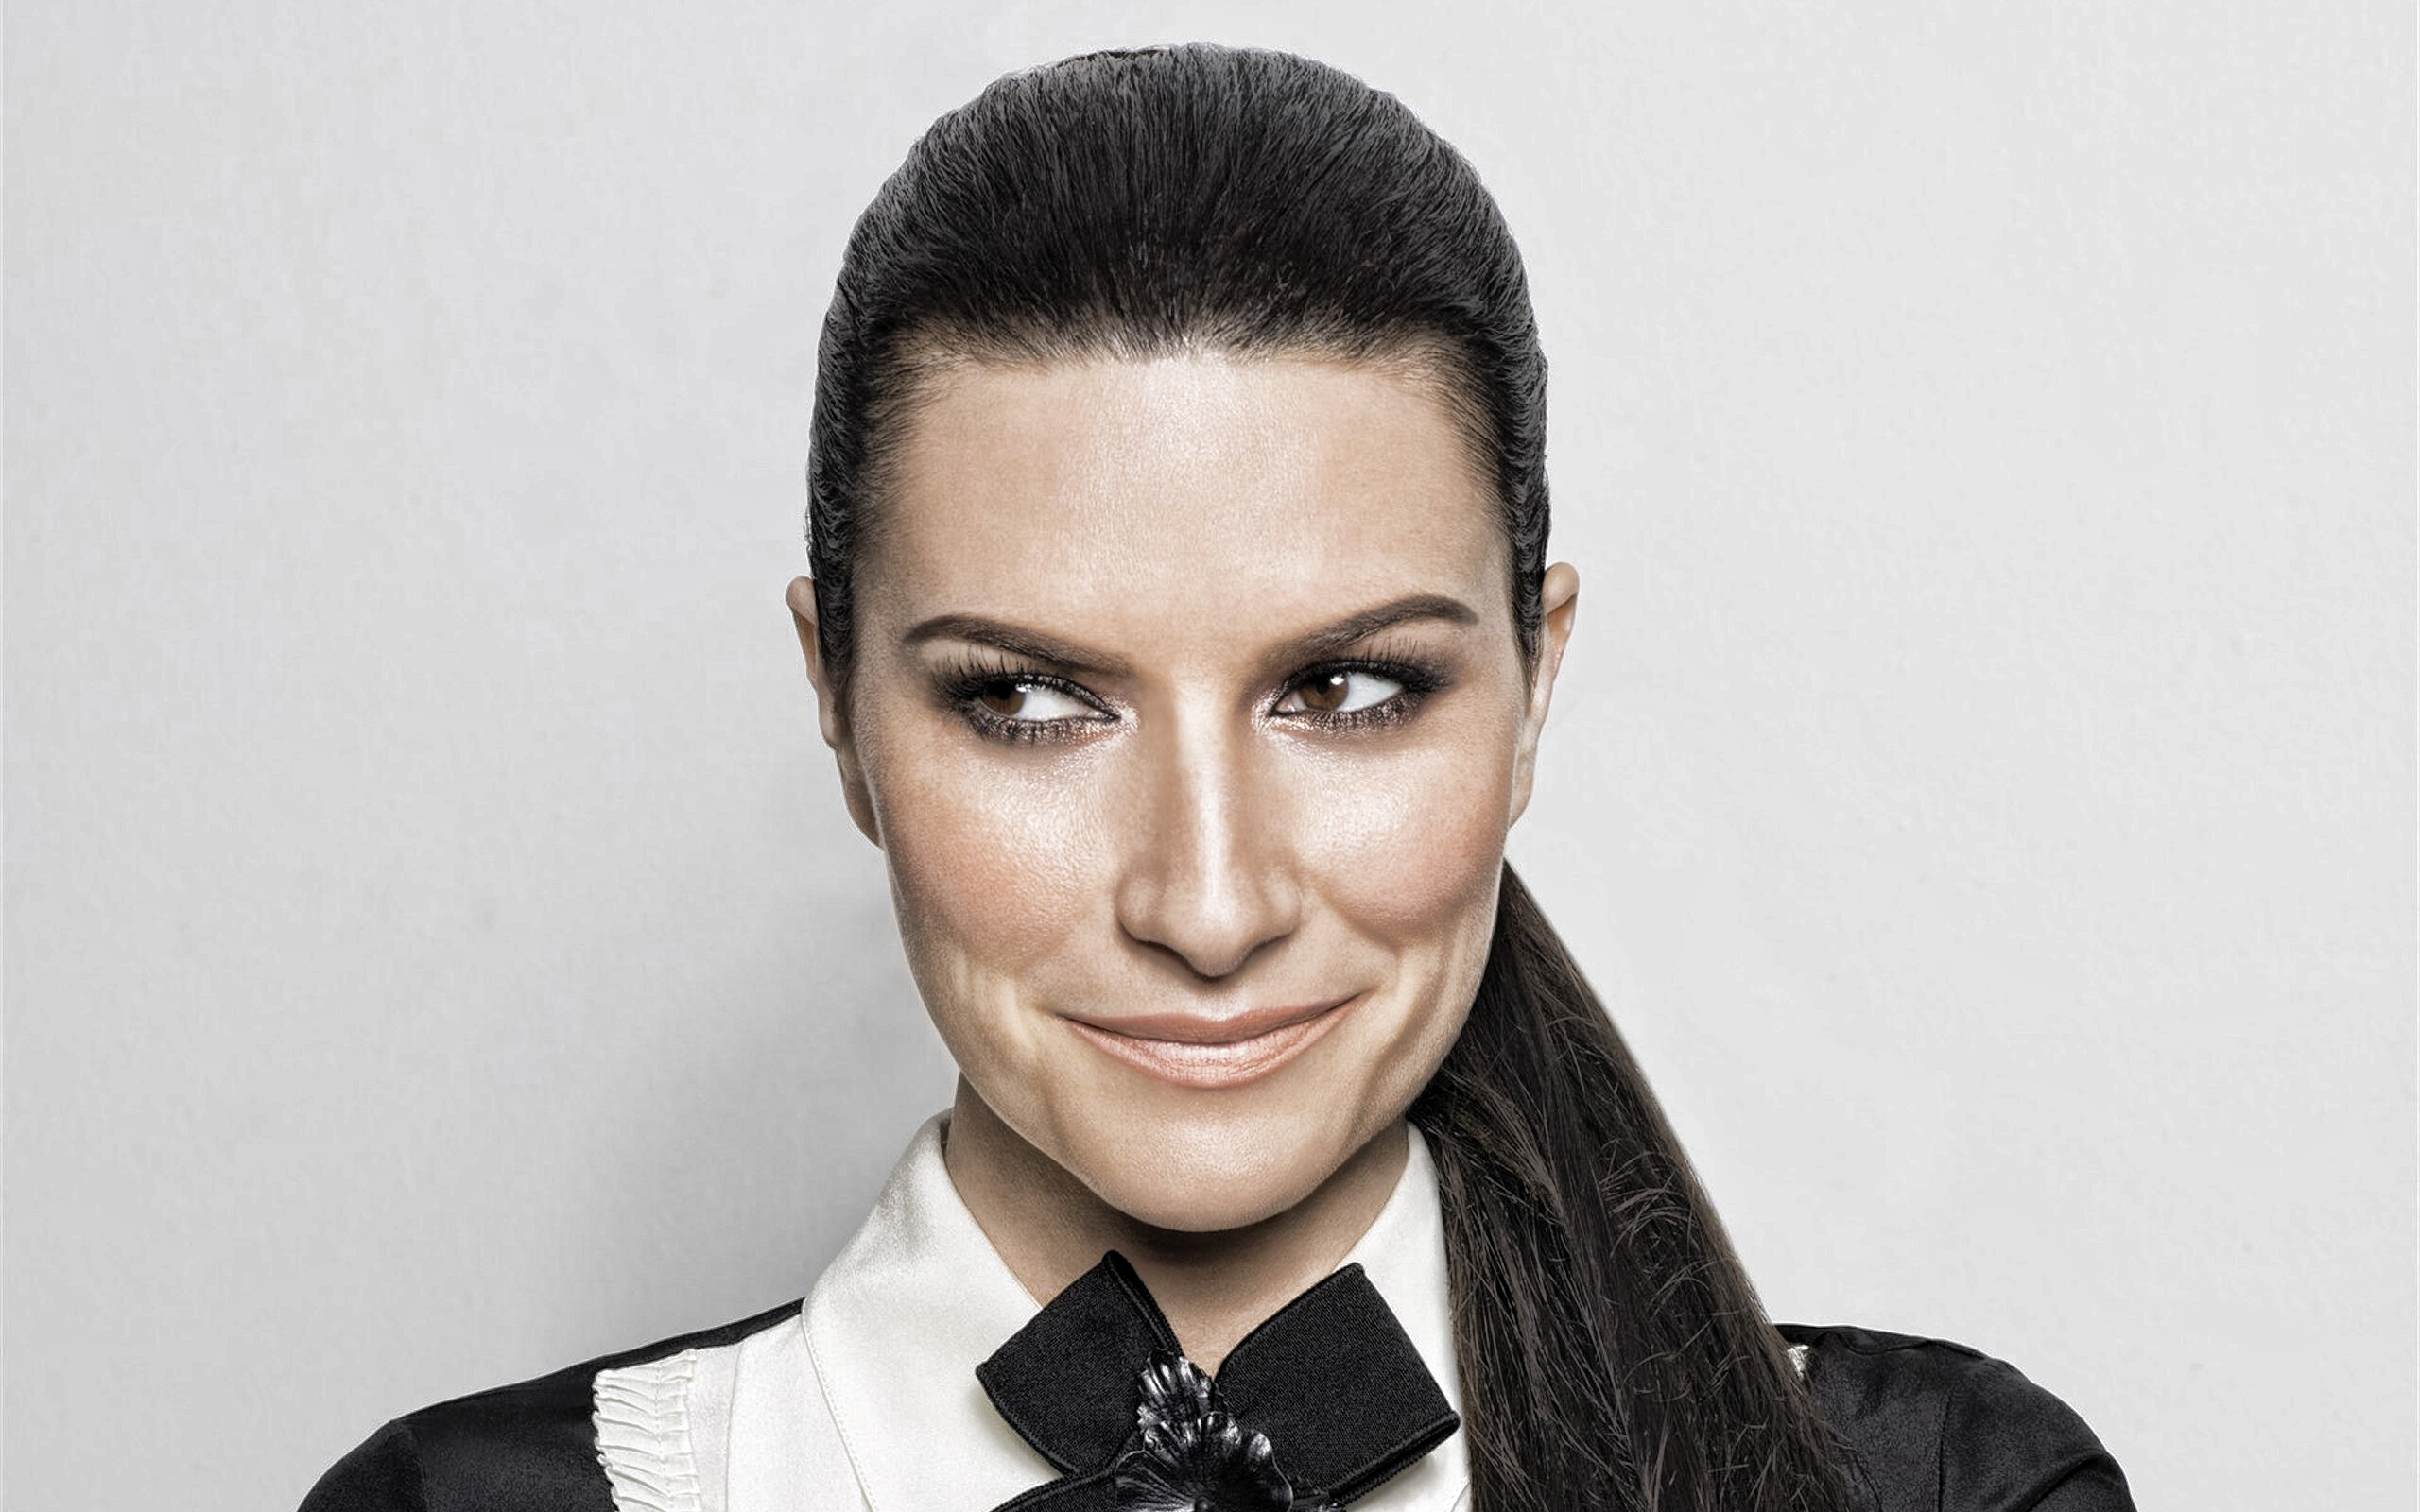 Laura Pausini: Mostly performs in Italian and Spanish, but also by having recorded and sung songs in Portuguese, English, French, German, Latin, Chinese, Catalan, Neapolitan, Romagnol, and Sicilian. 2560x1600 HD Wallpaper.